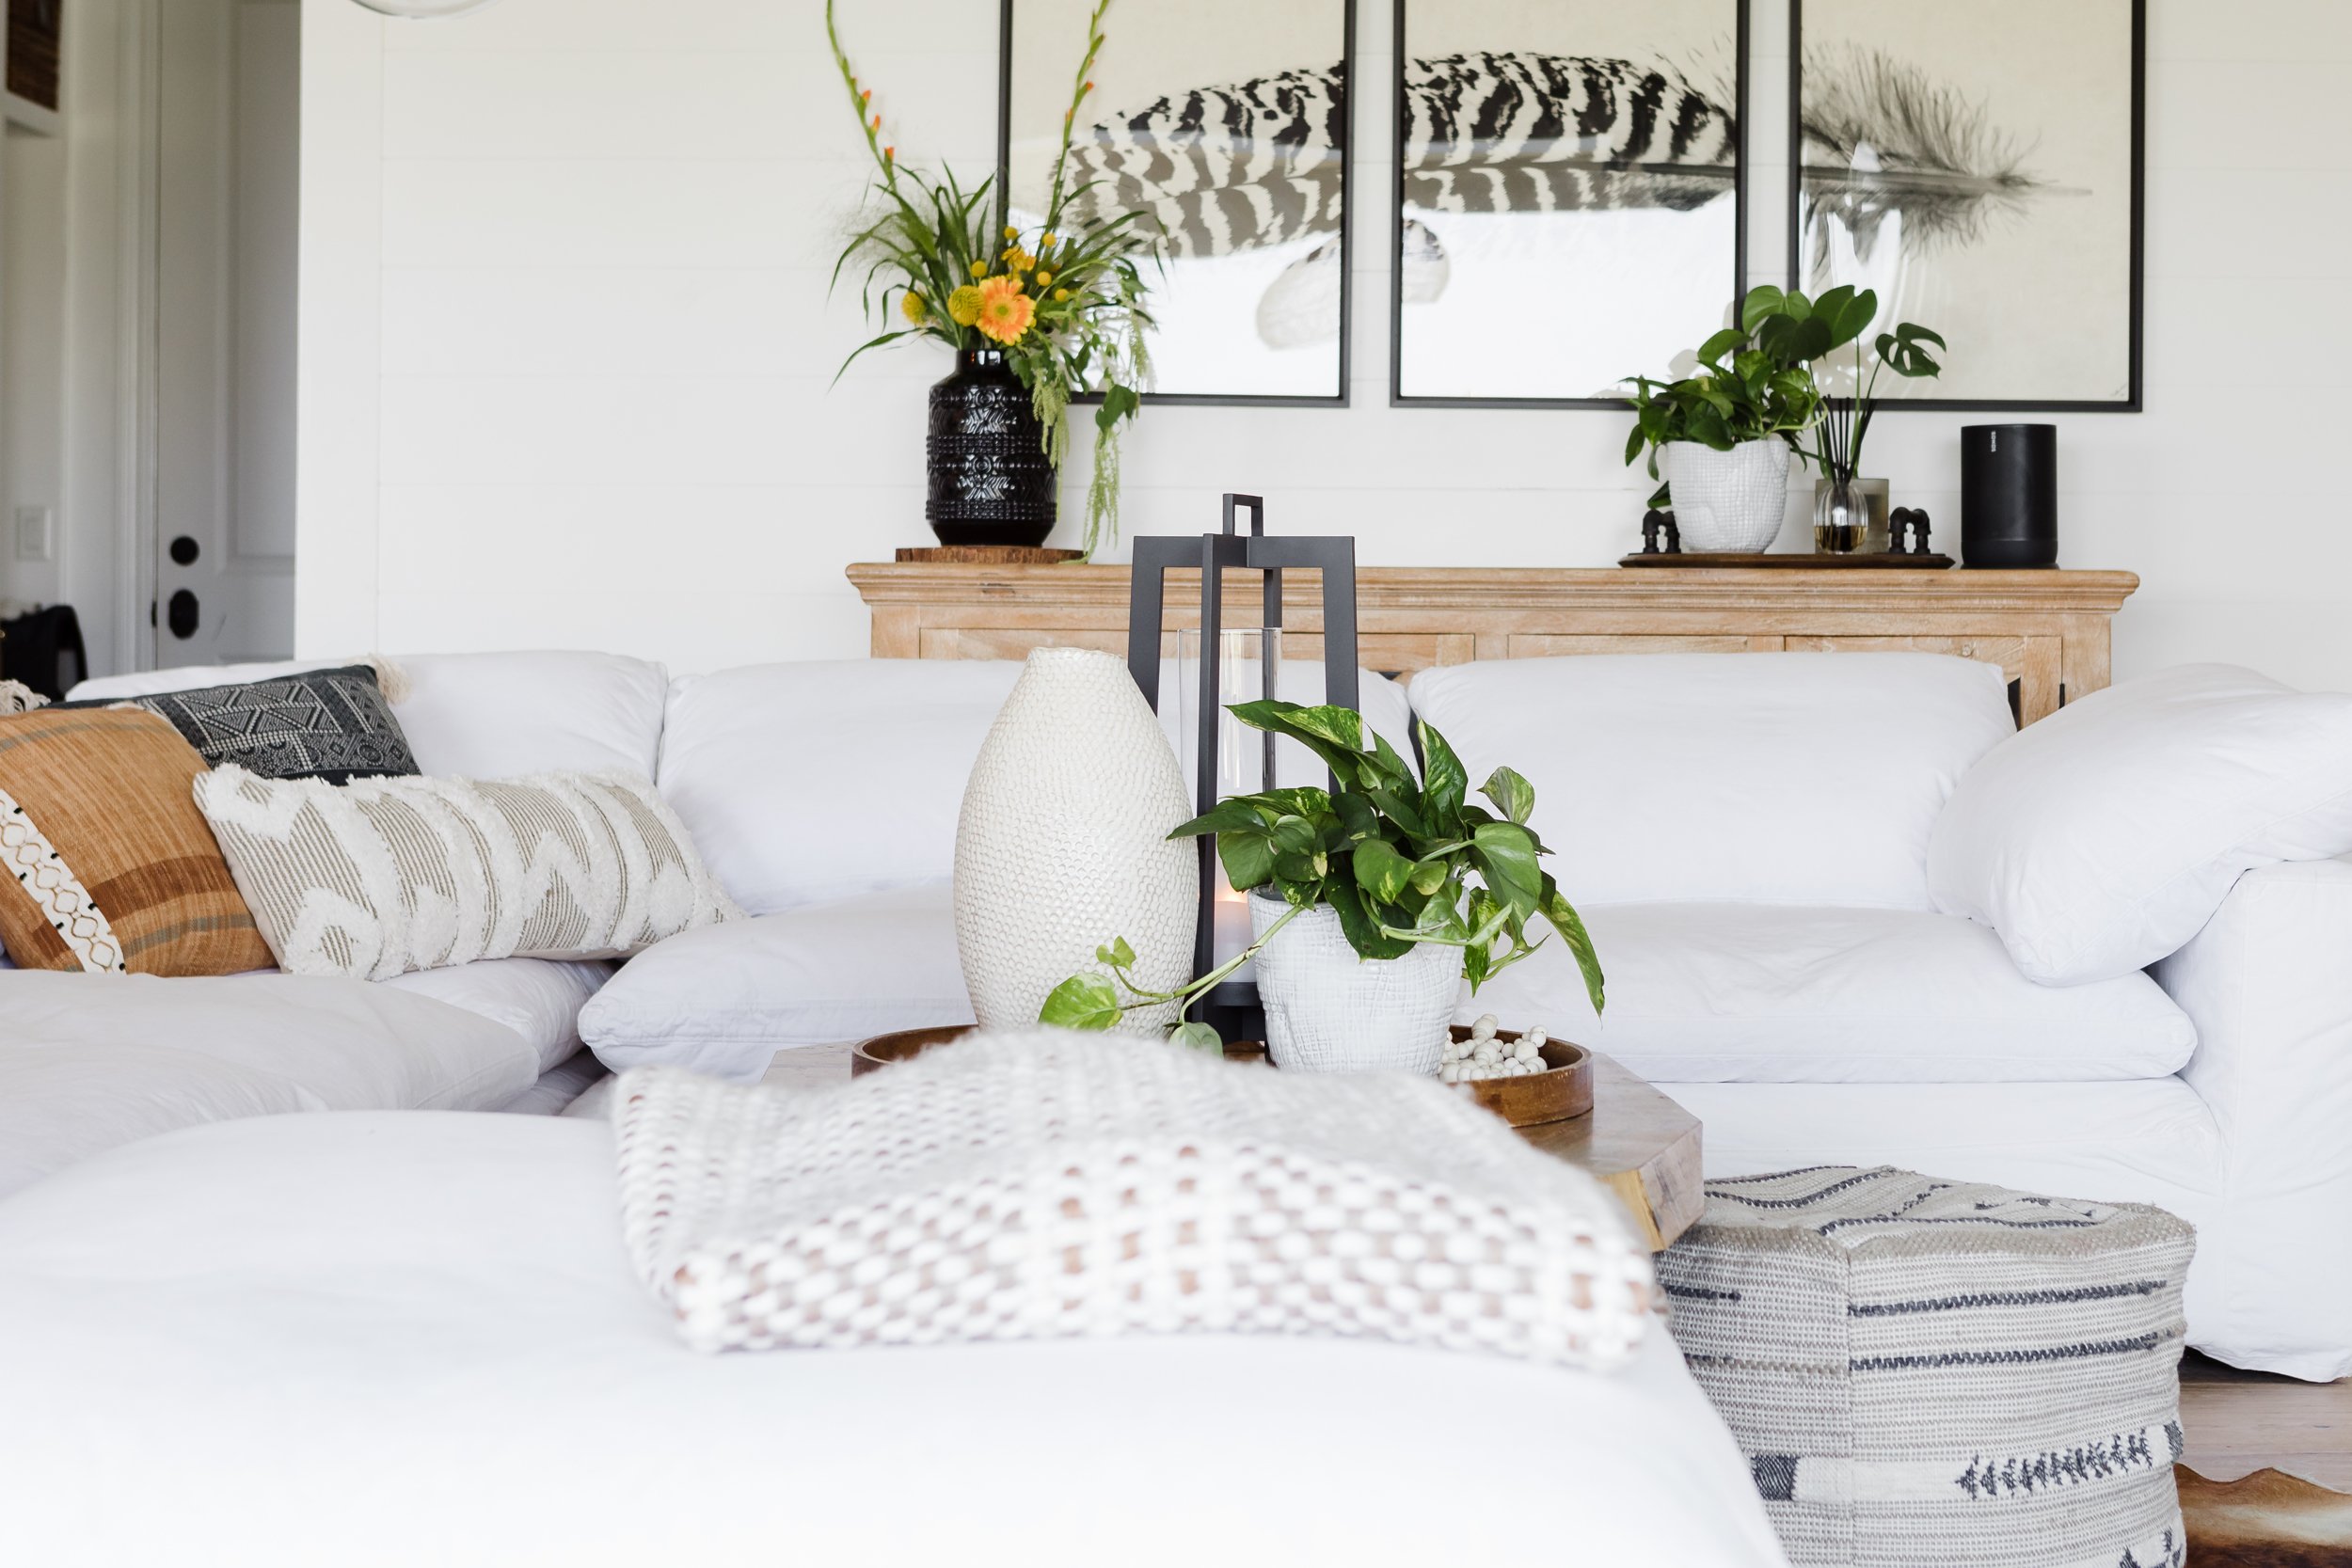 5 Tips On How to Clean a White Couch - City Girl Gone Mom